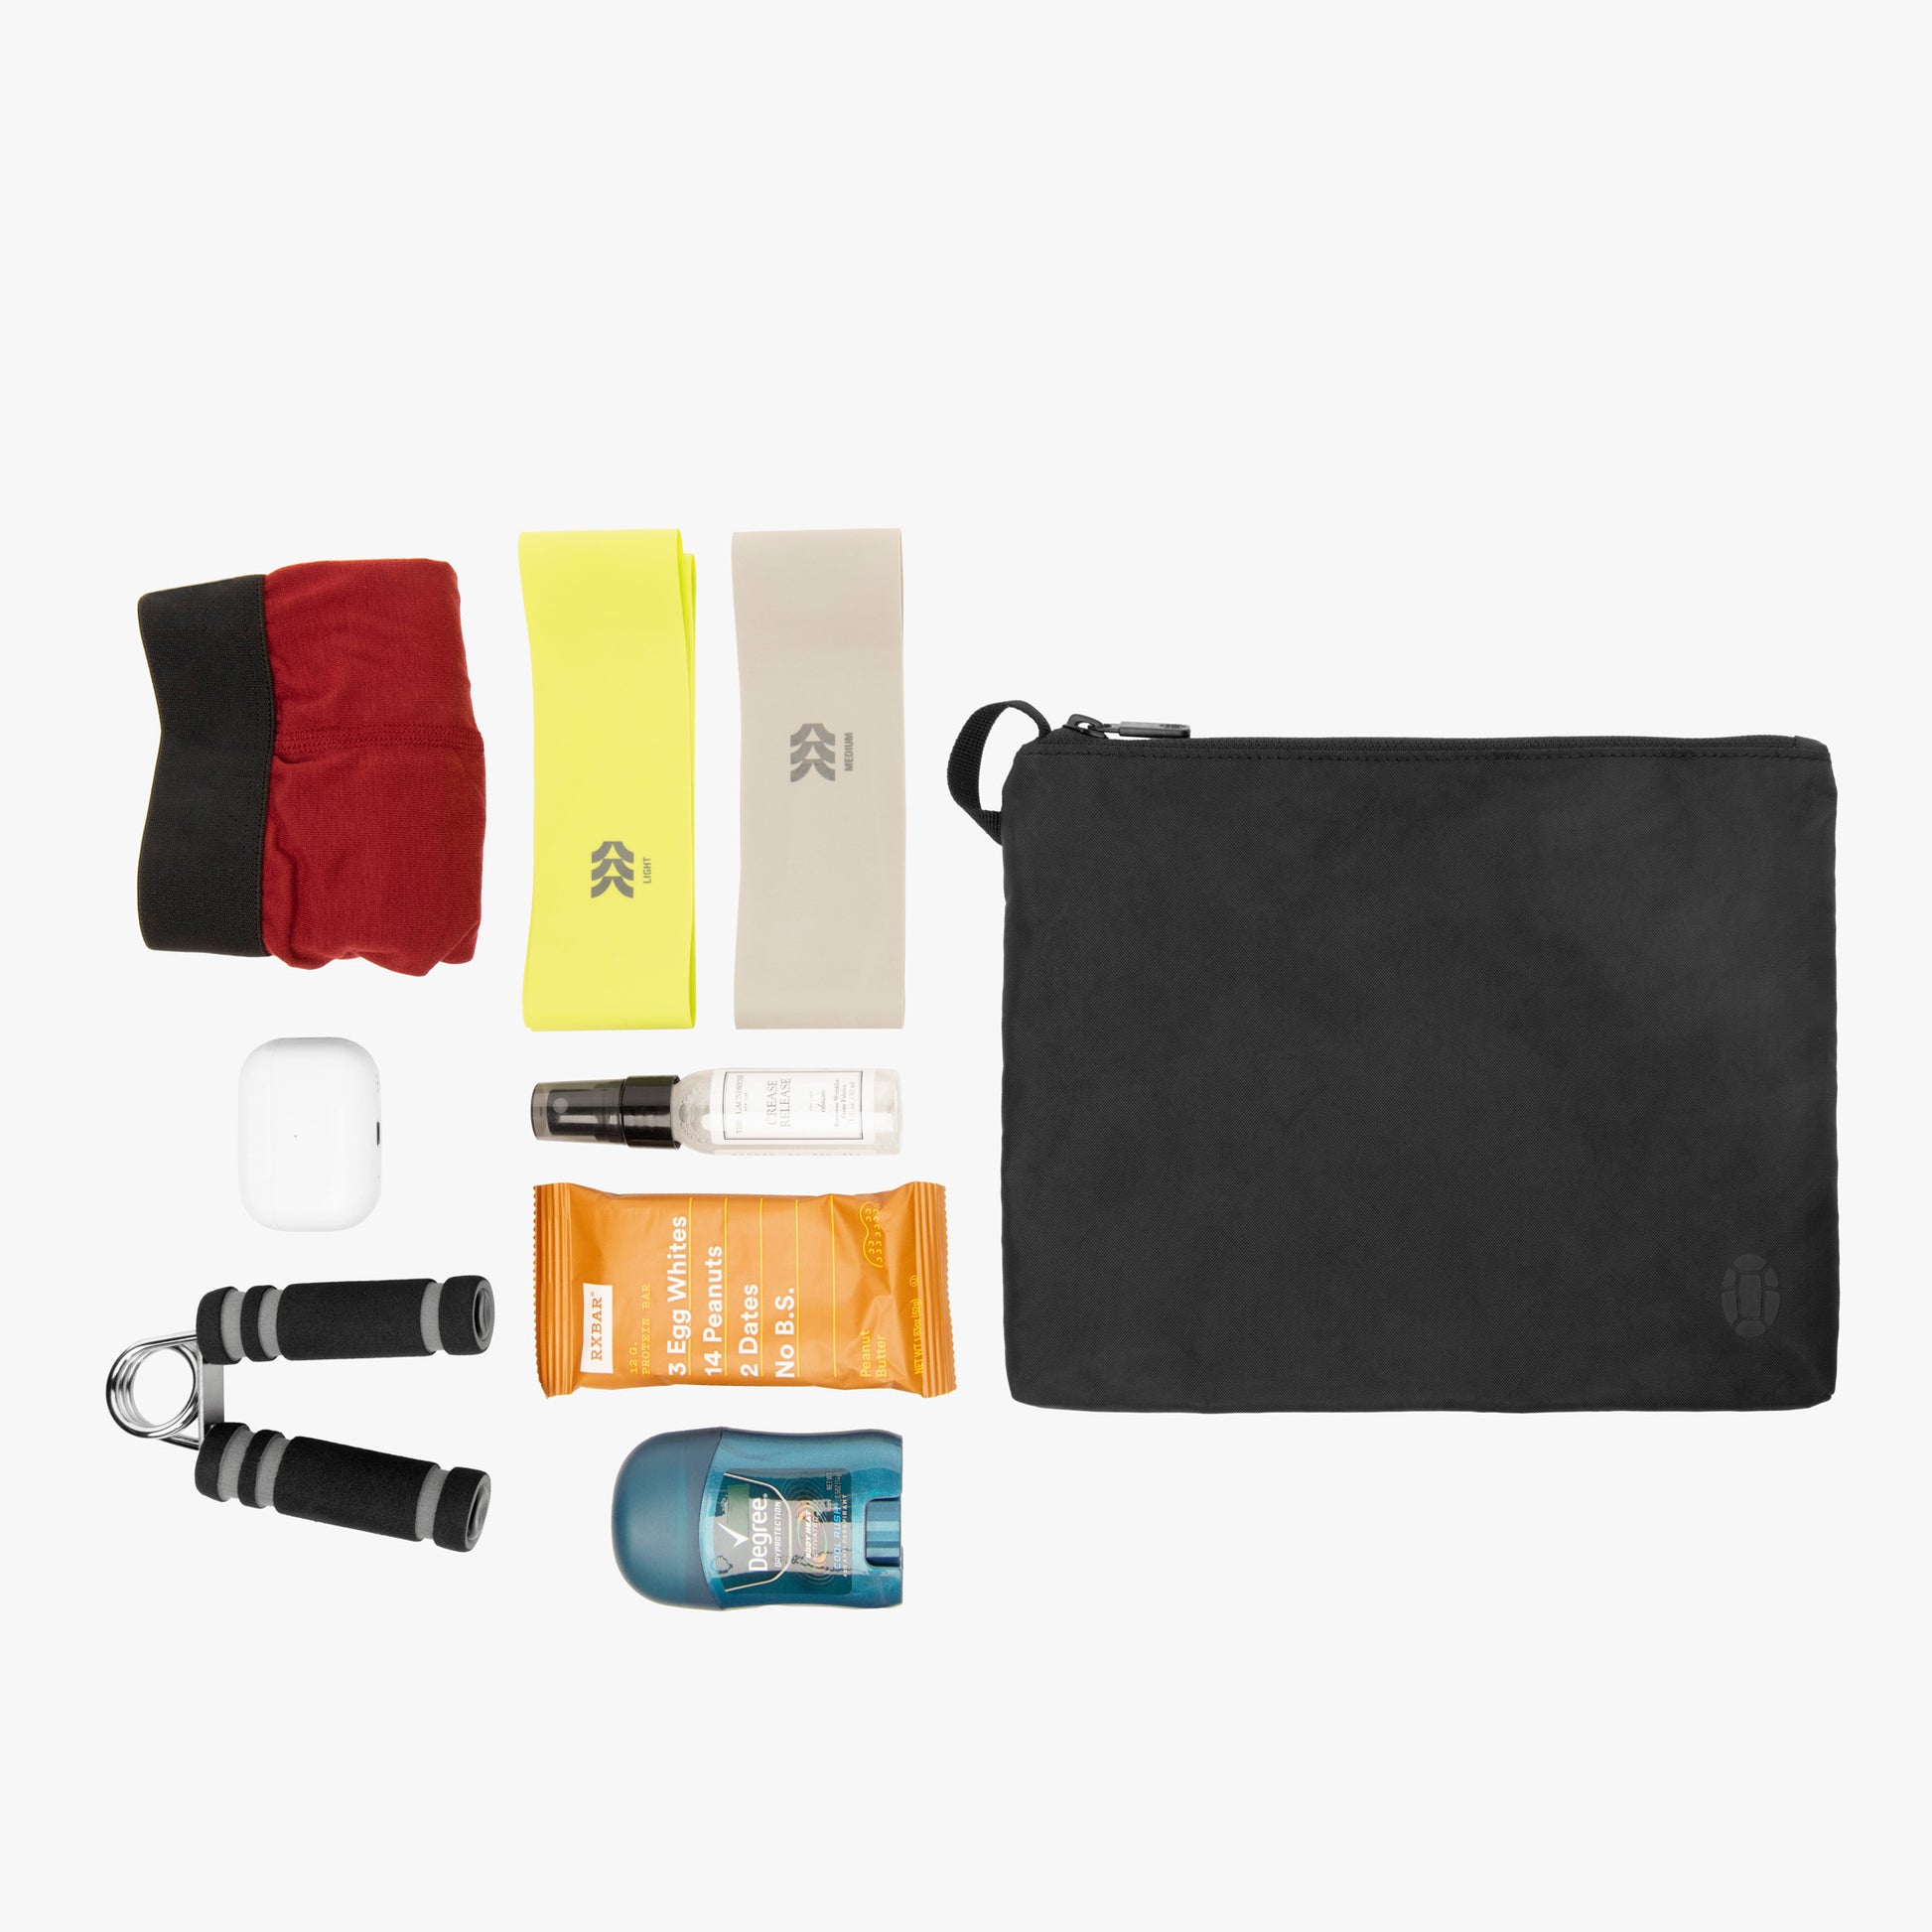 Exercise gear in the large pouch